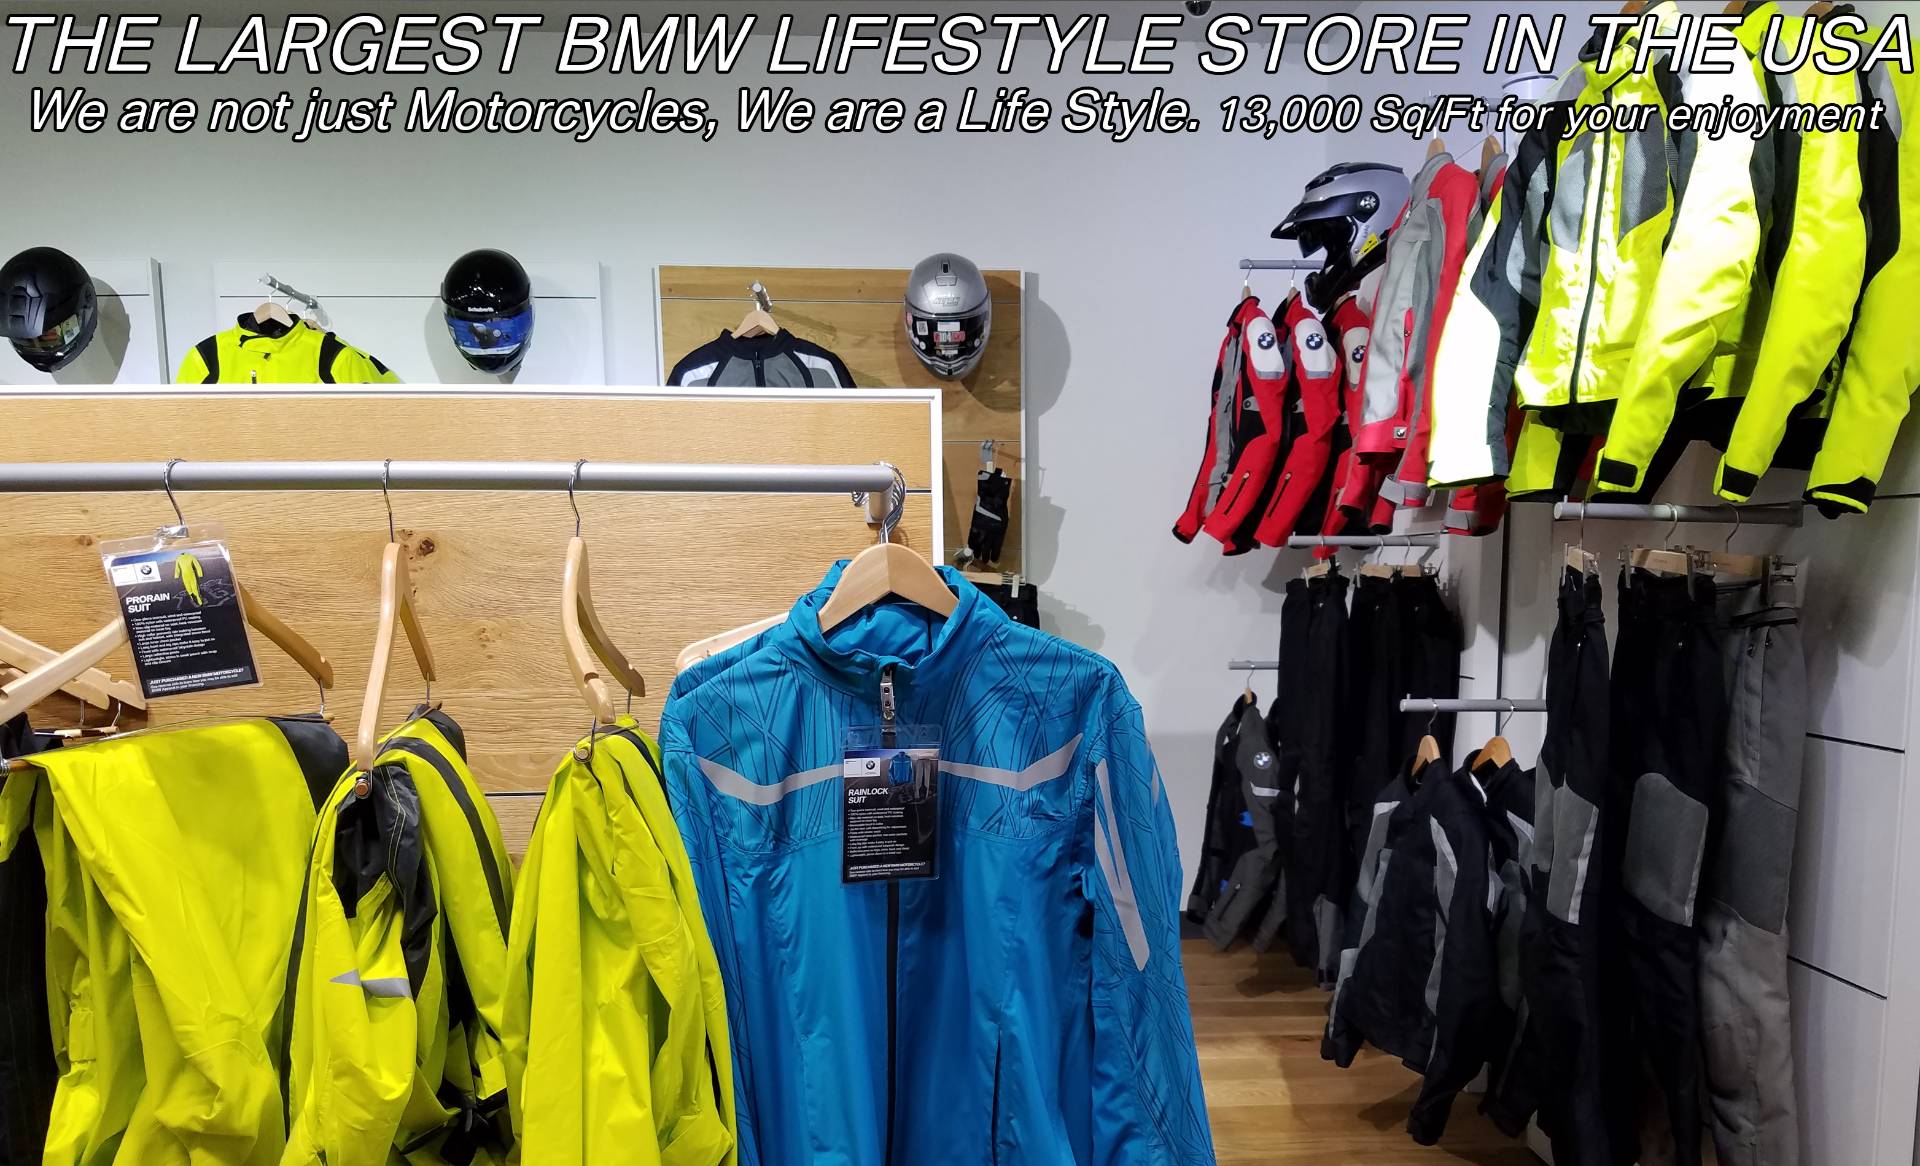 New 2019 BMW R 1250 GS Motorcycles in Miami, FL